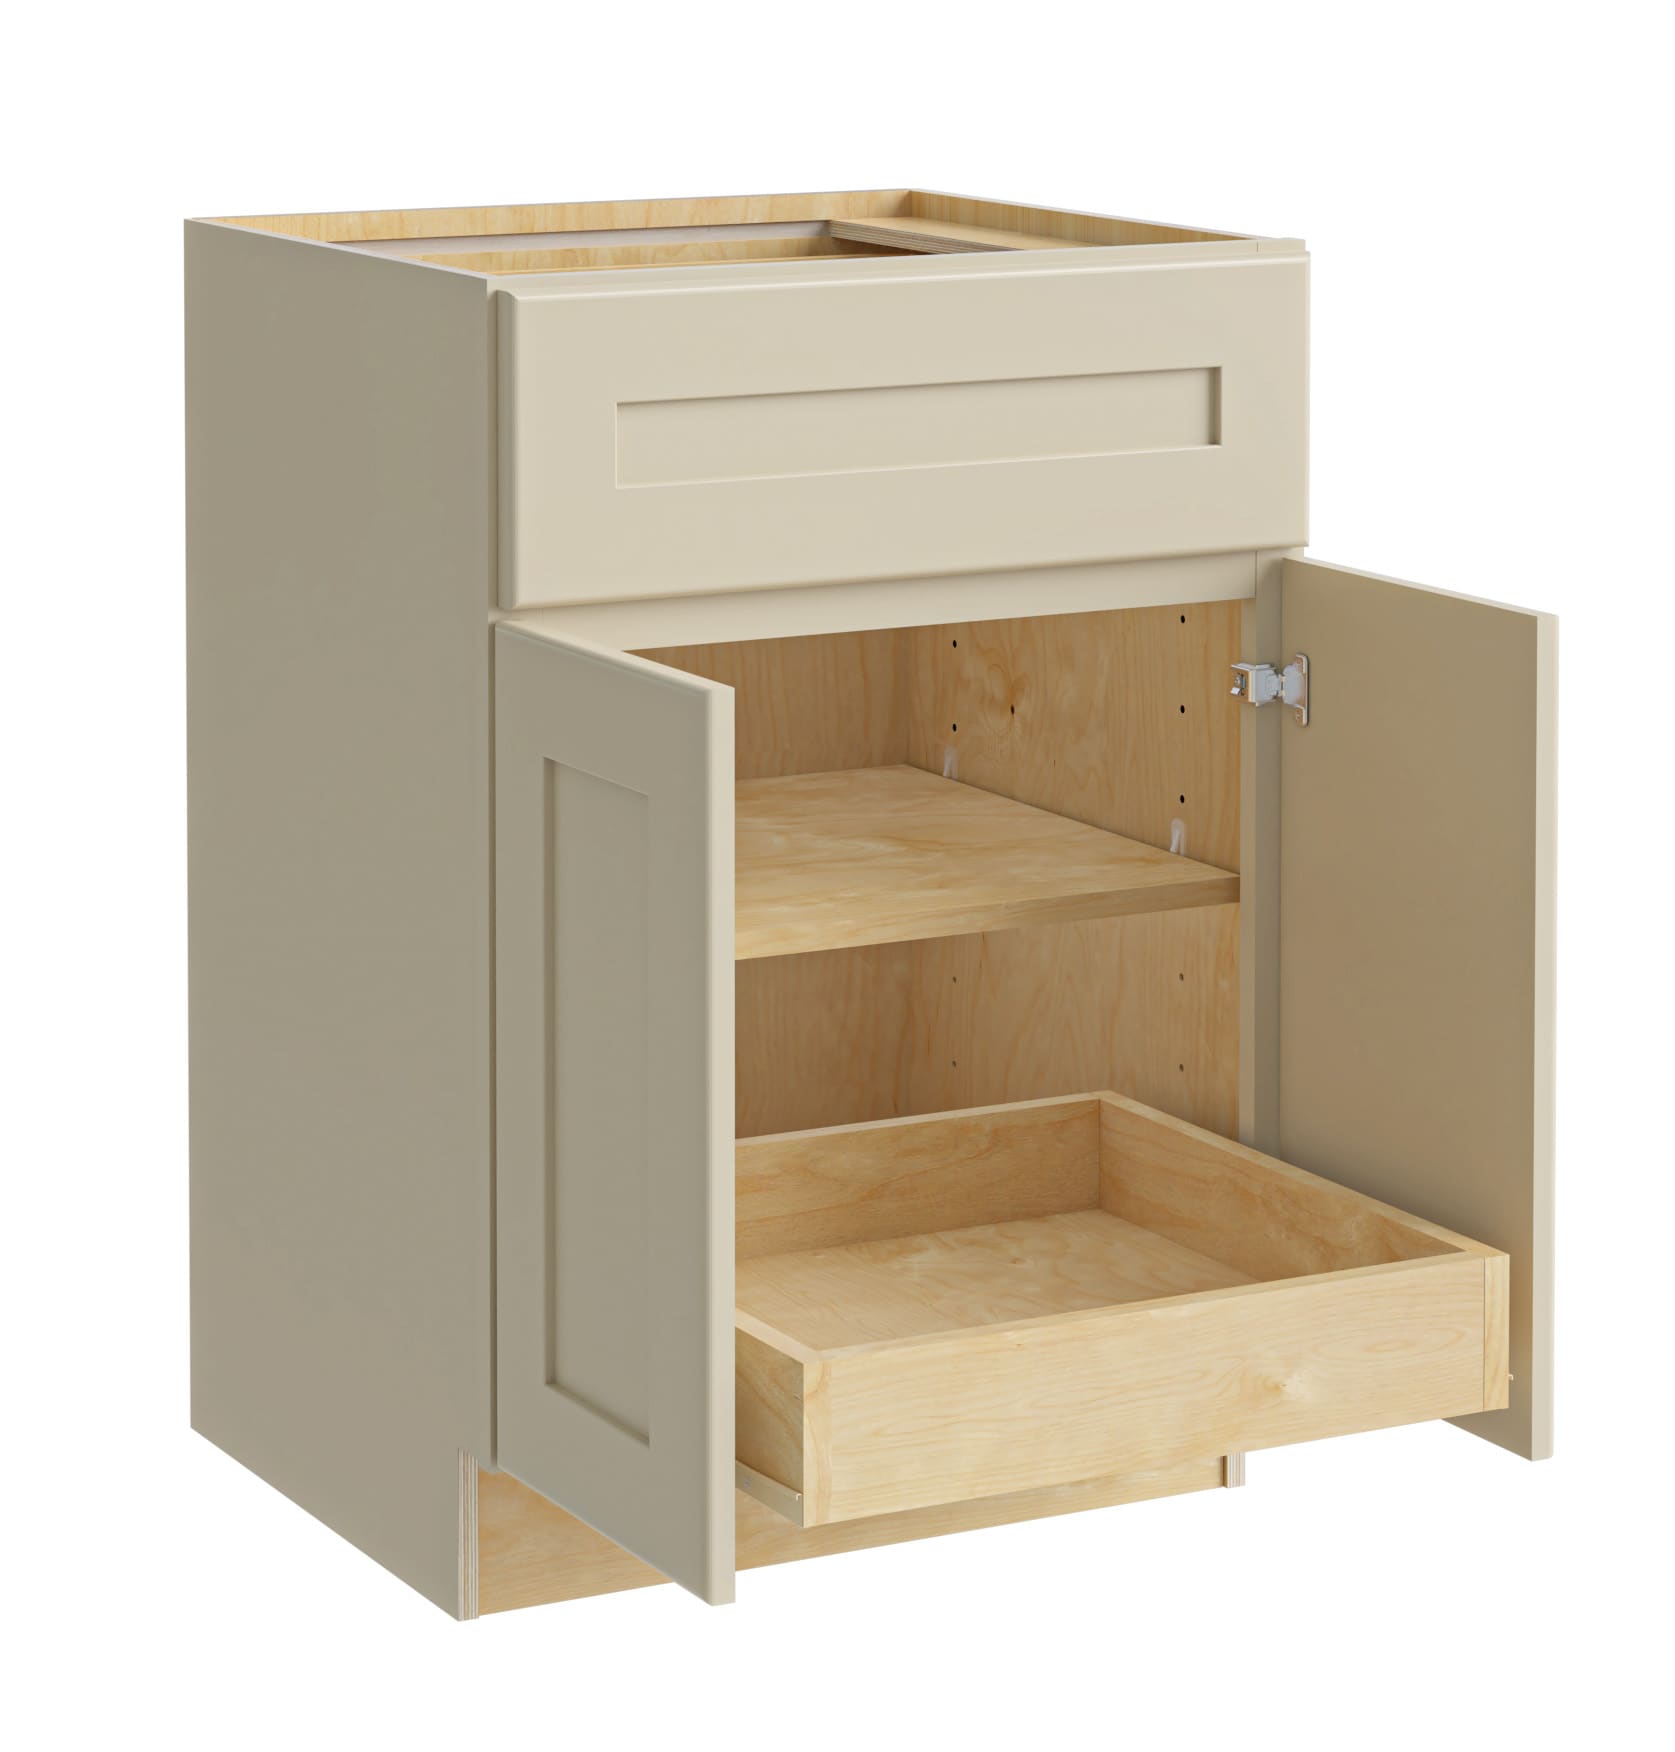 Luxxe Cabinetry 24-in W x 34.5-in H x 24-in D Norfolk Blended Cream Painted Door and Drawer Base Fully Assembled Semi-custom Cabinet in Off-White